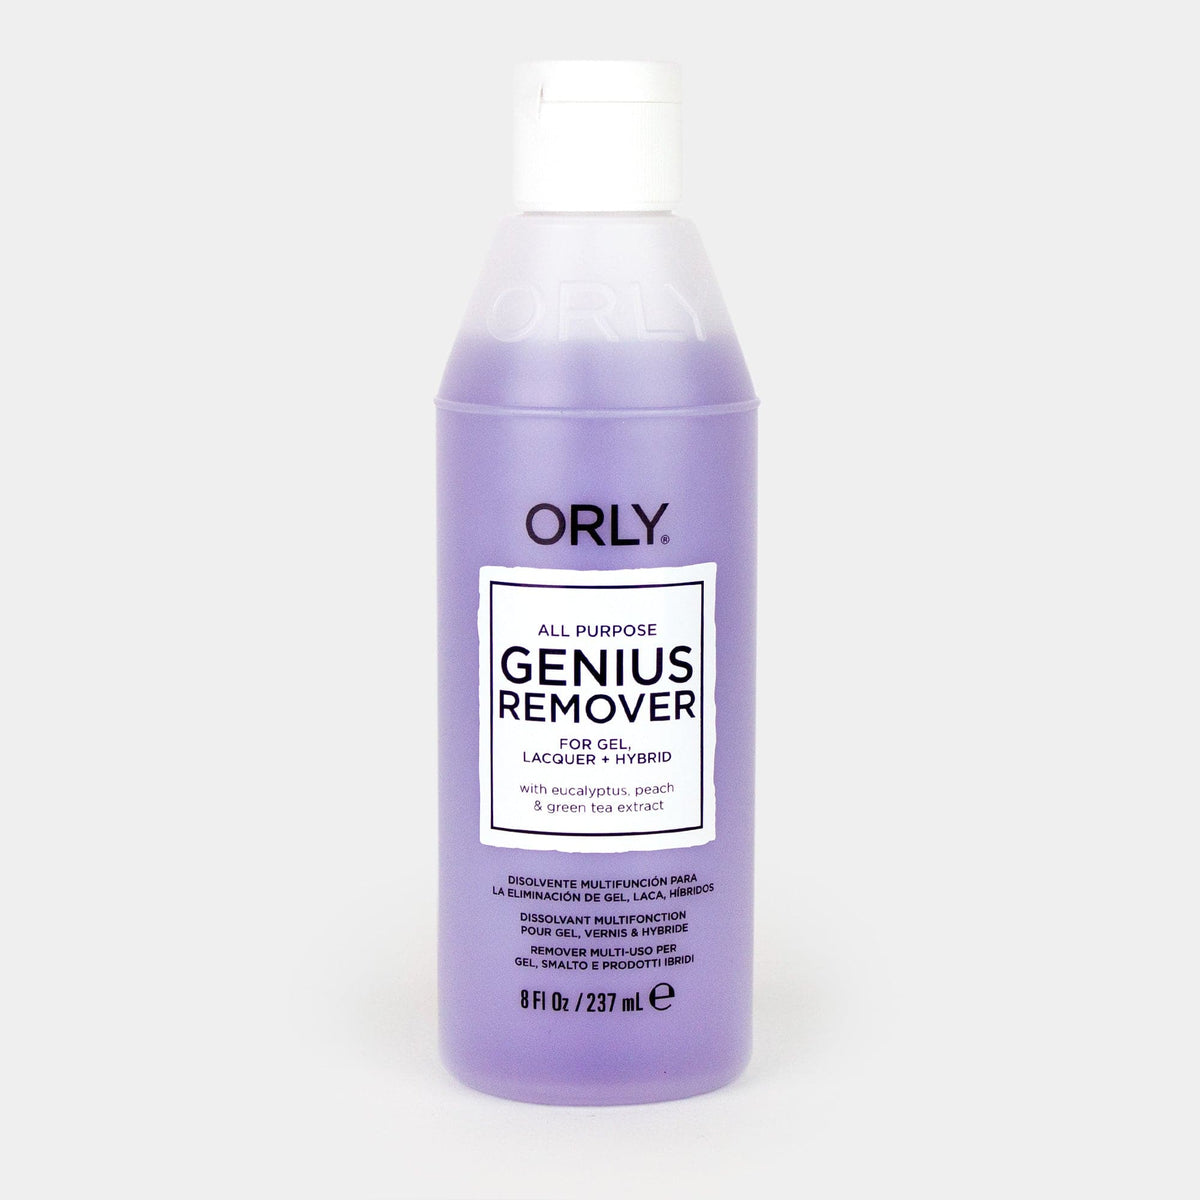 ORLY Genius Nail Polish Remover in 237ml product photo - photographed in Europe